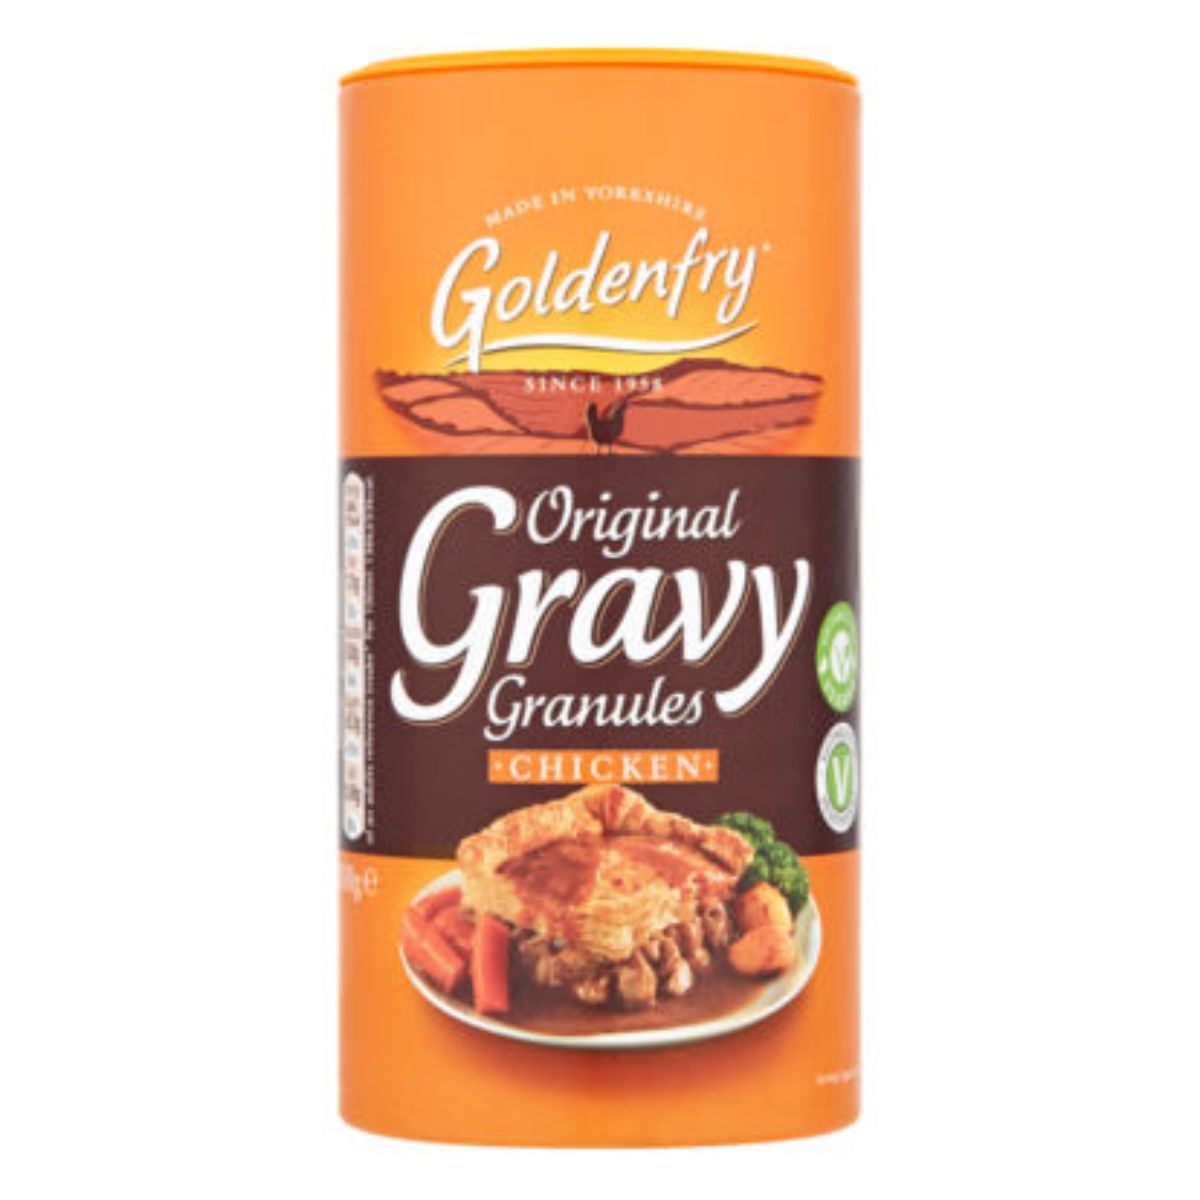 A can of Goldenfry - Gravy Chicken Granules - 300g on a white background.